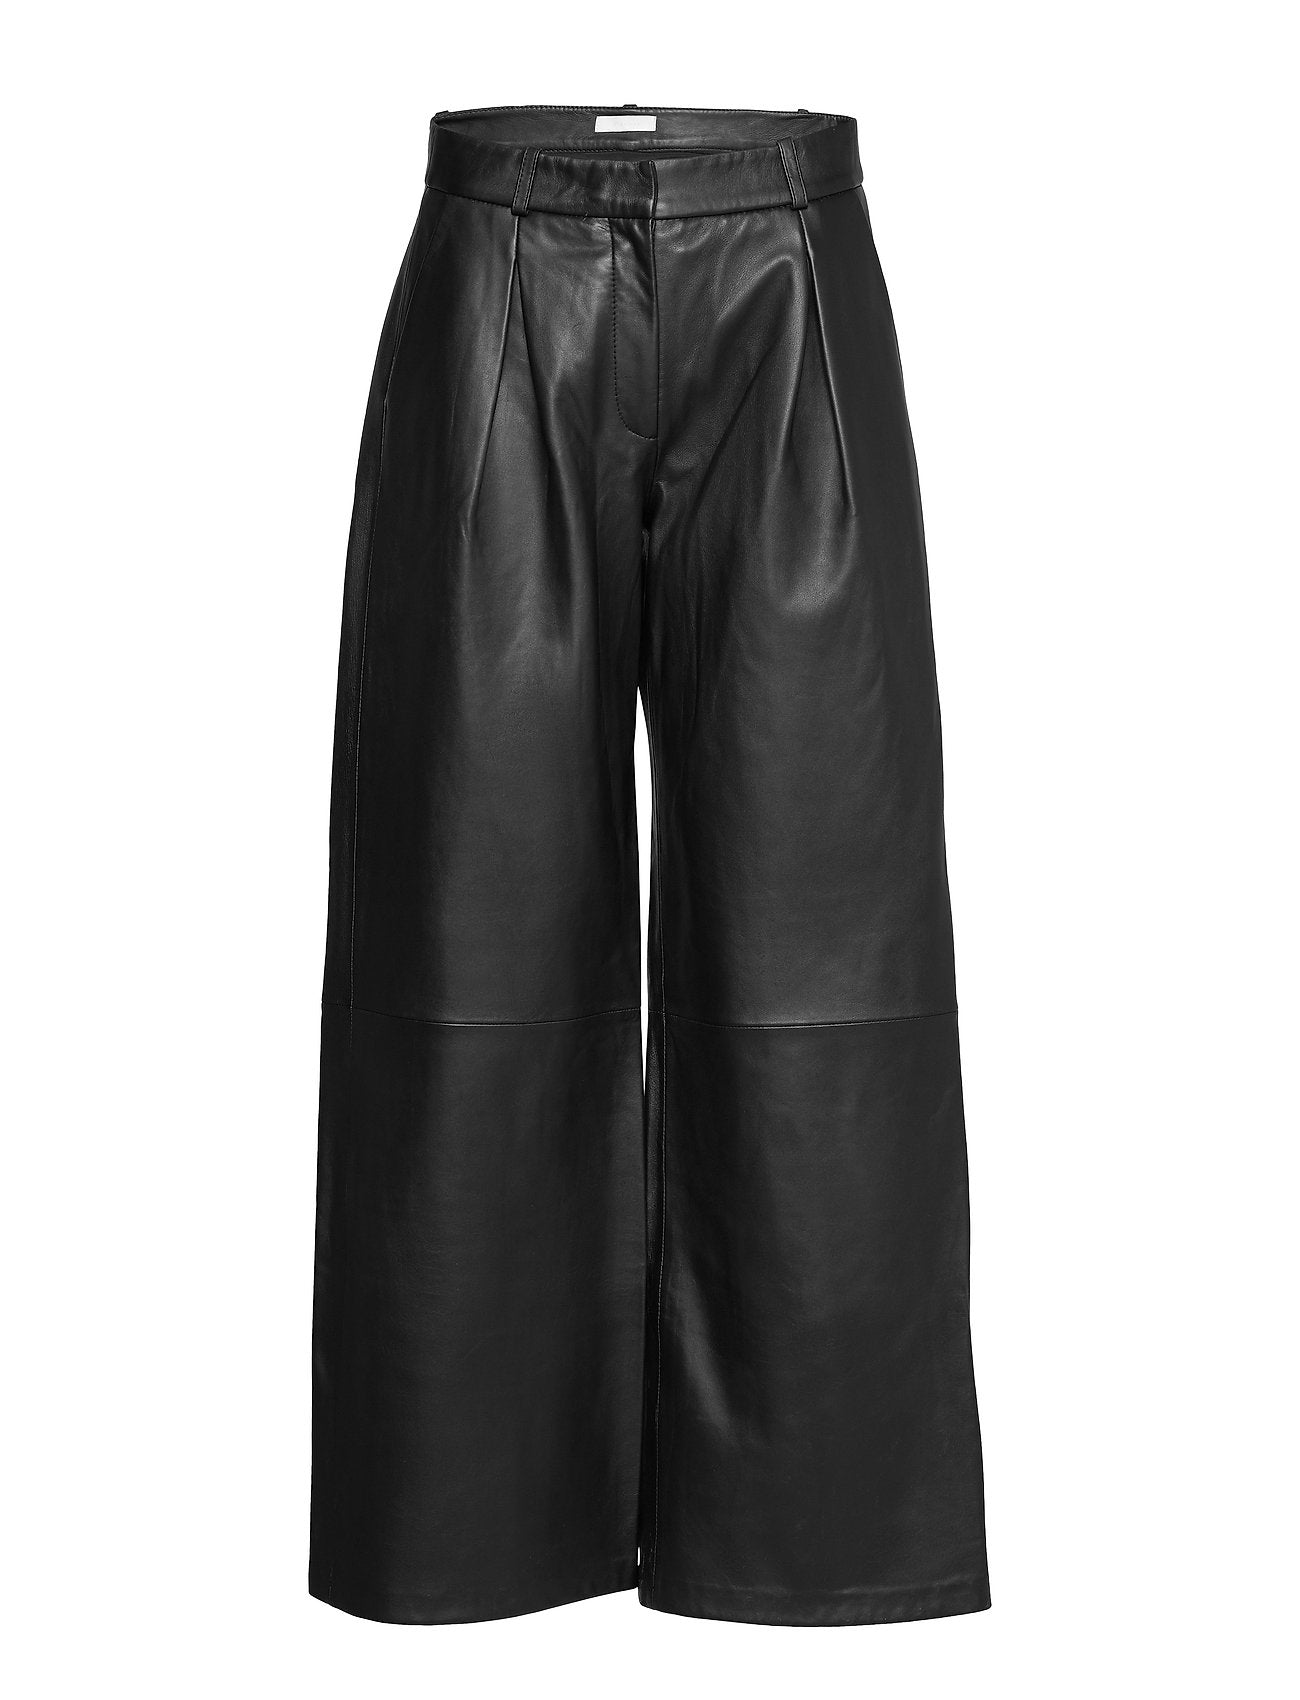 PLEATED FRONT STRAIGHT LEG LEATHER PANTS IN BLACK